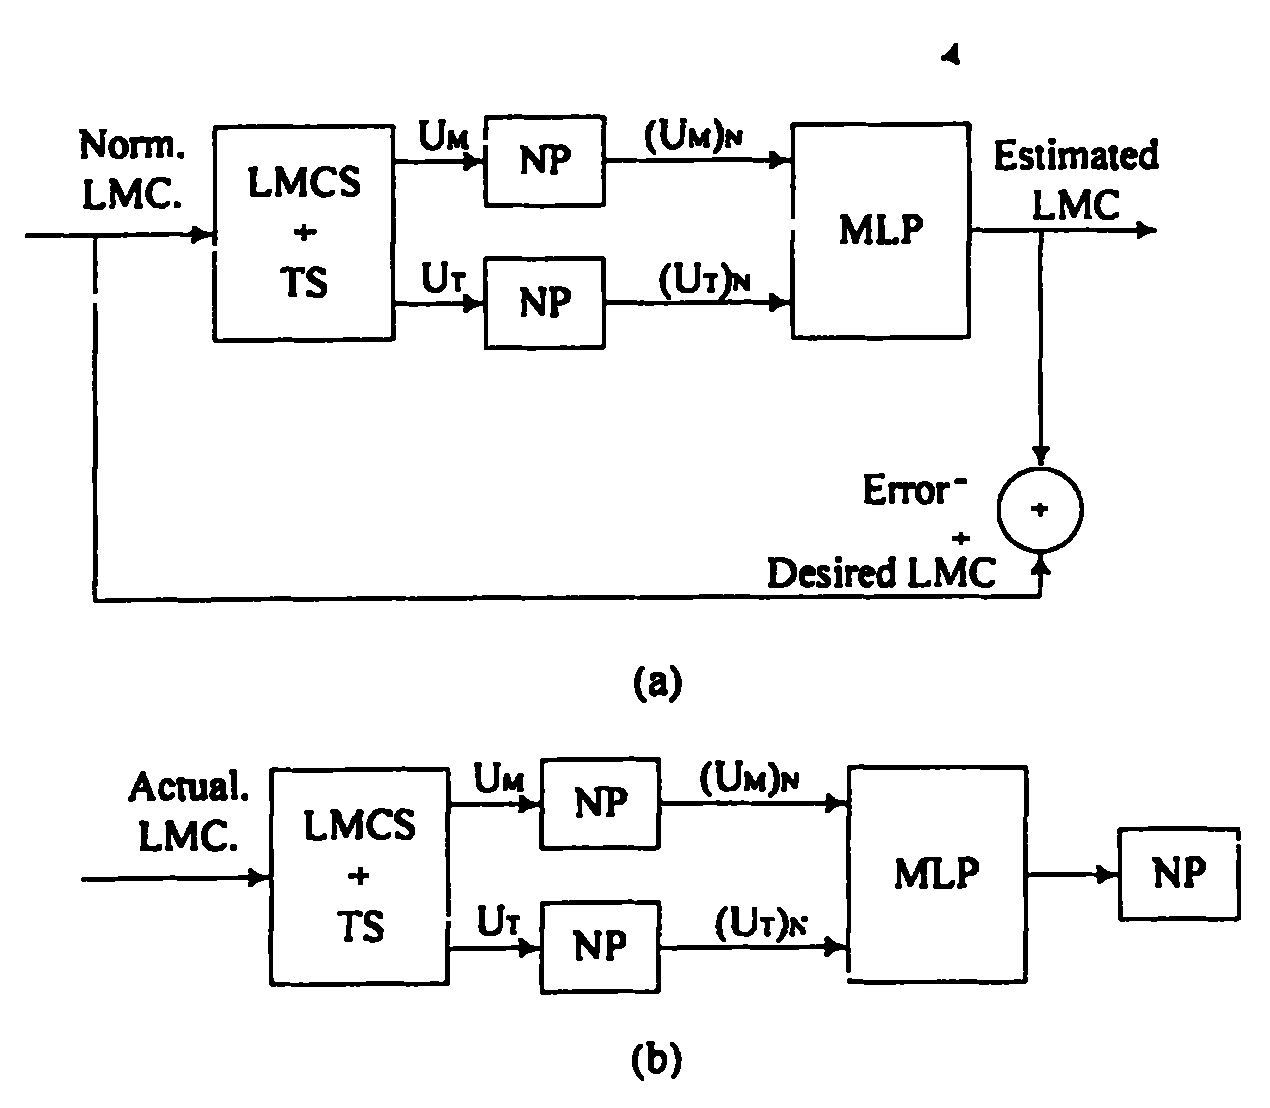 Particle swarm optimization neural network model-based method for detecting moisture content of wood